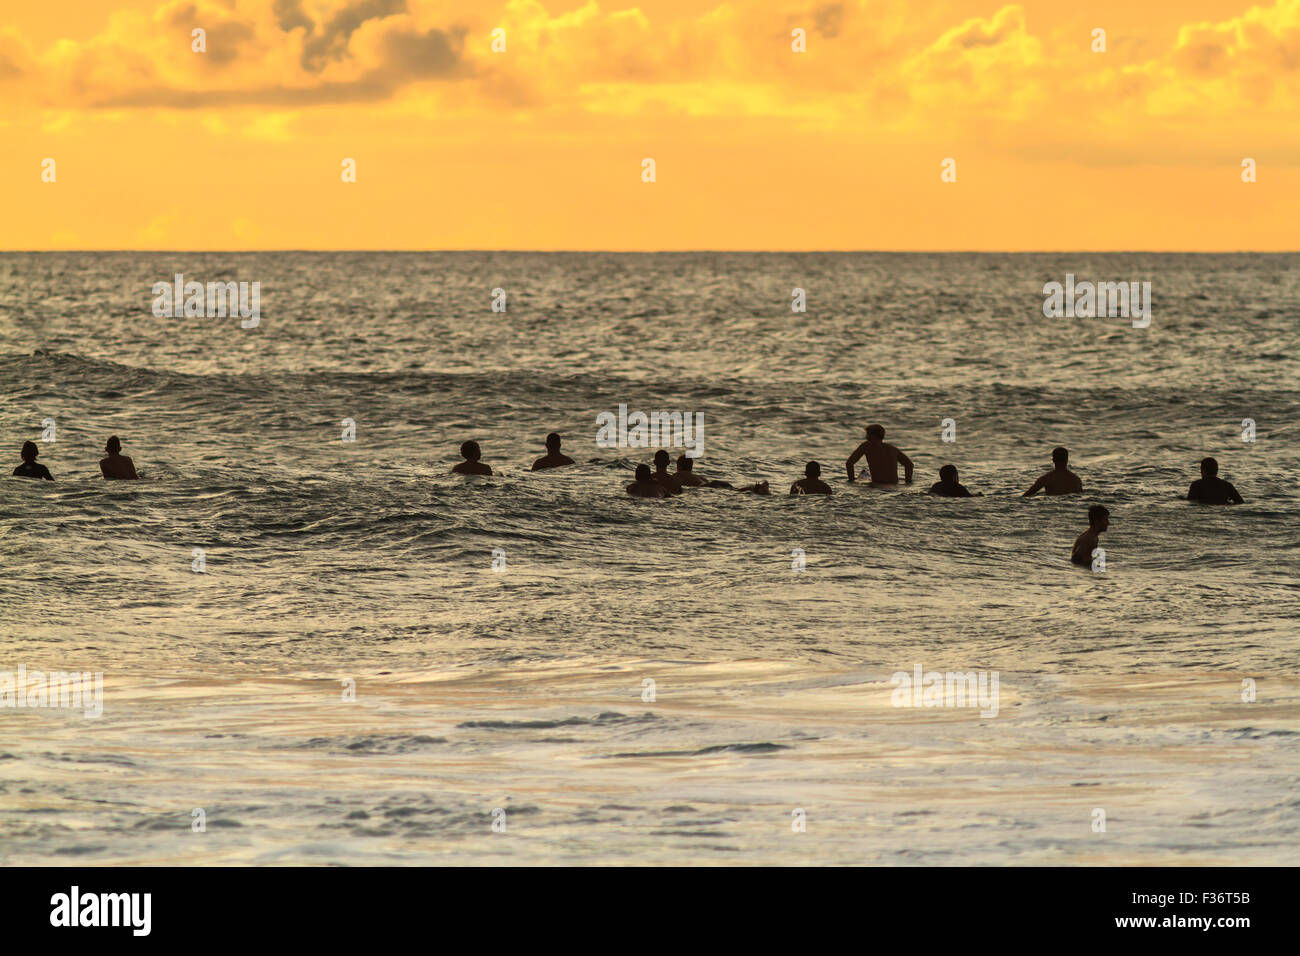 Surfers waiting for a wave during the sunset on the north shore Oahu Hawaii Stock Photo